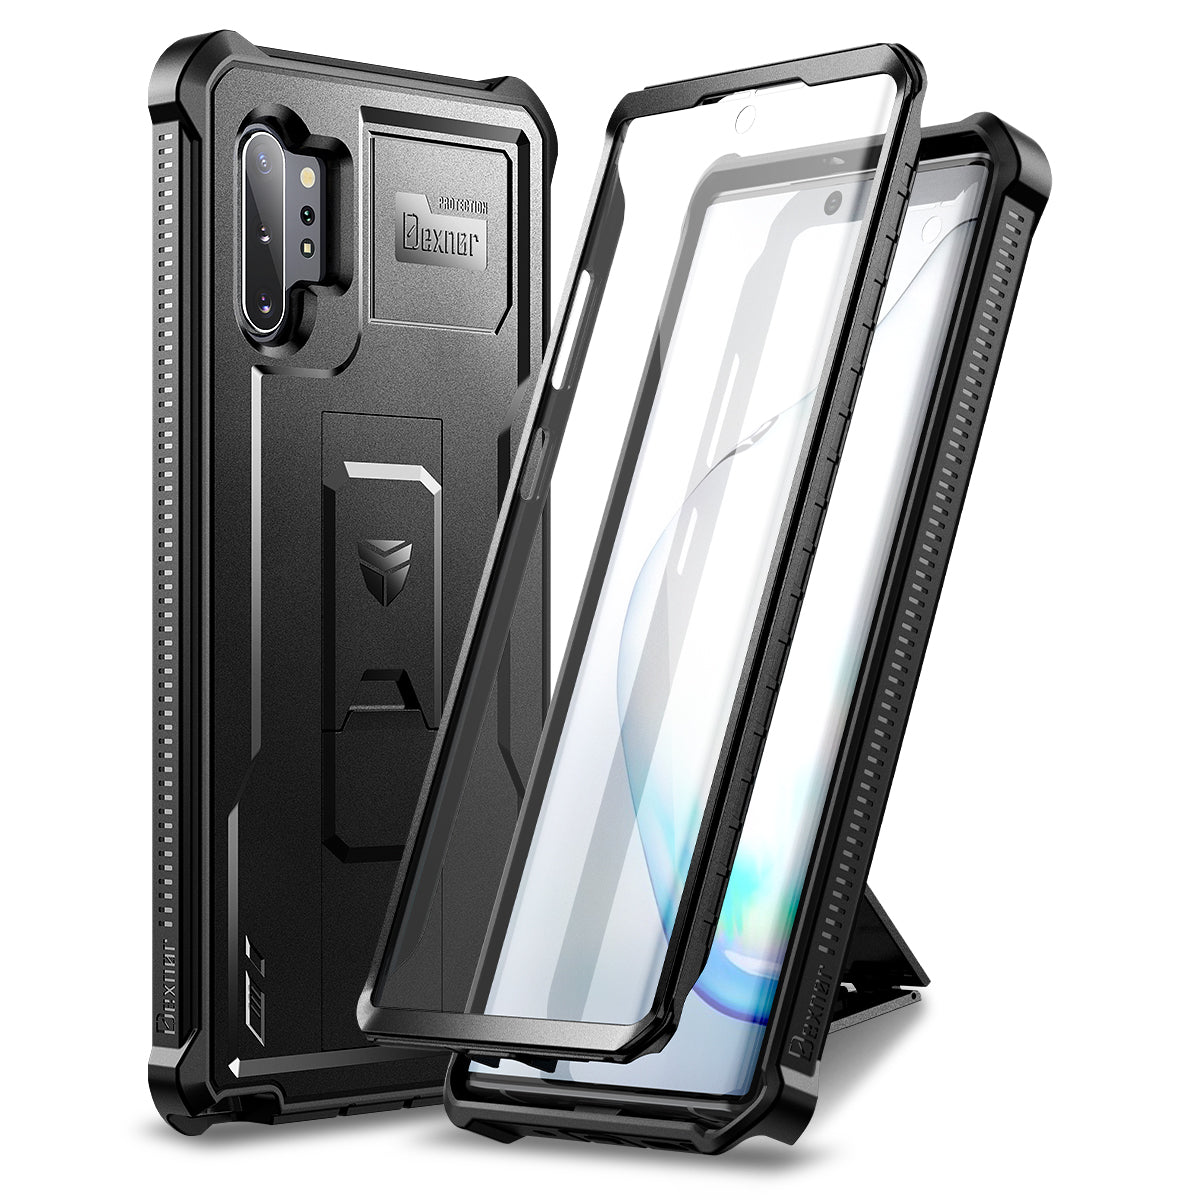 For Samsung Galaxy Note10+ case